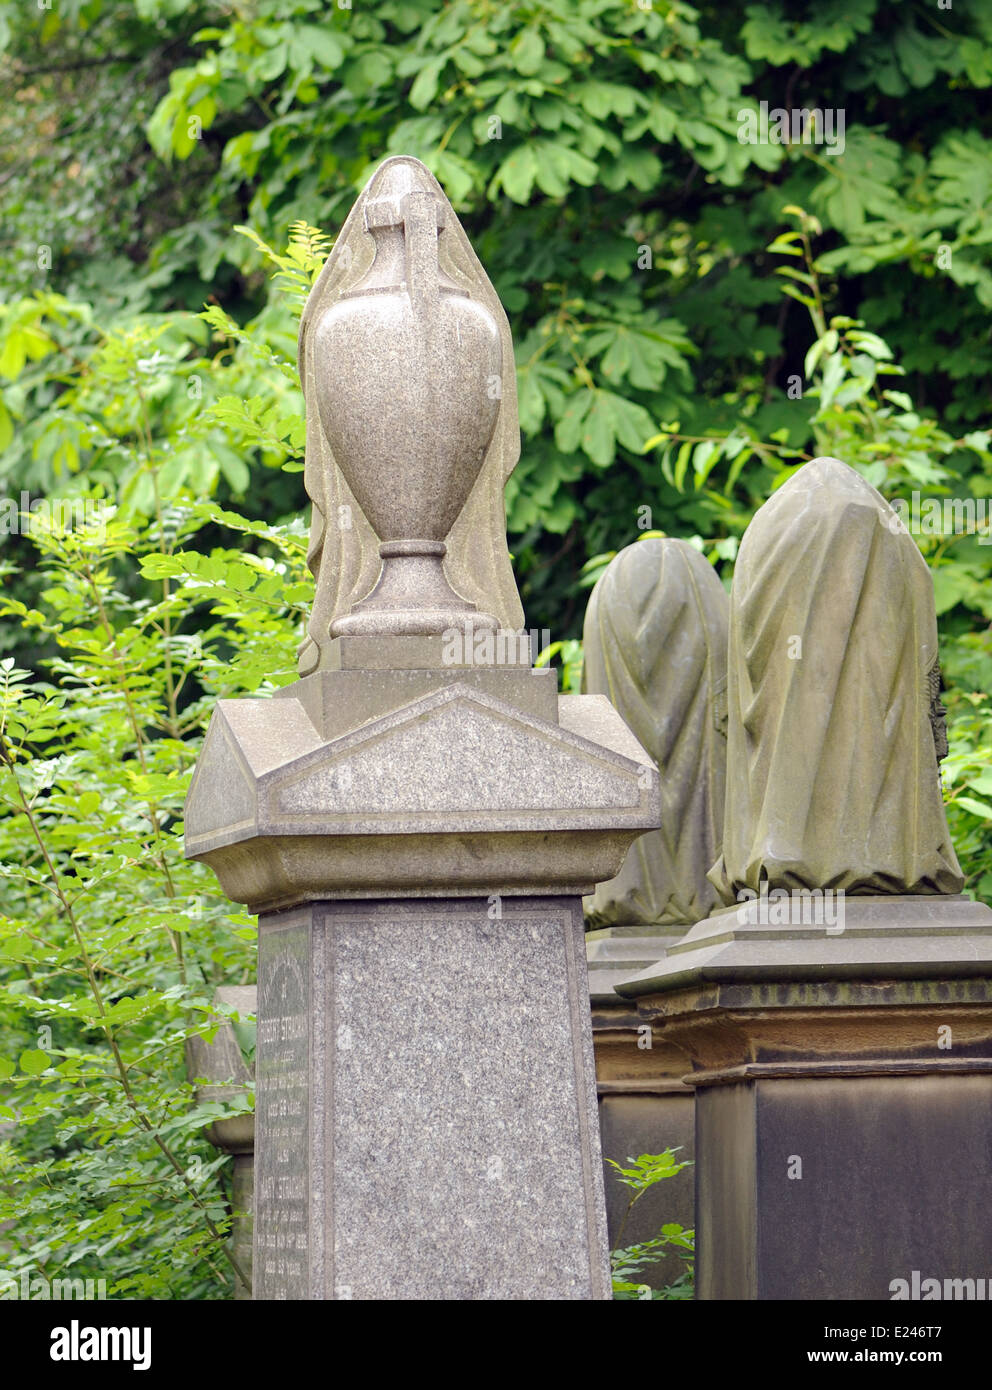 A veiled urn marks a grave in a cemetery. Leeds, UK 10Jul13 Stock Photo